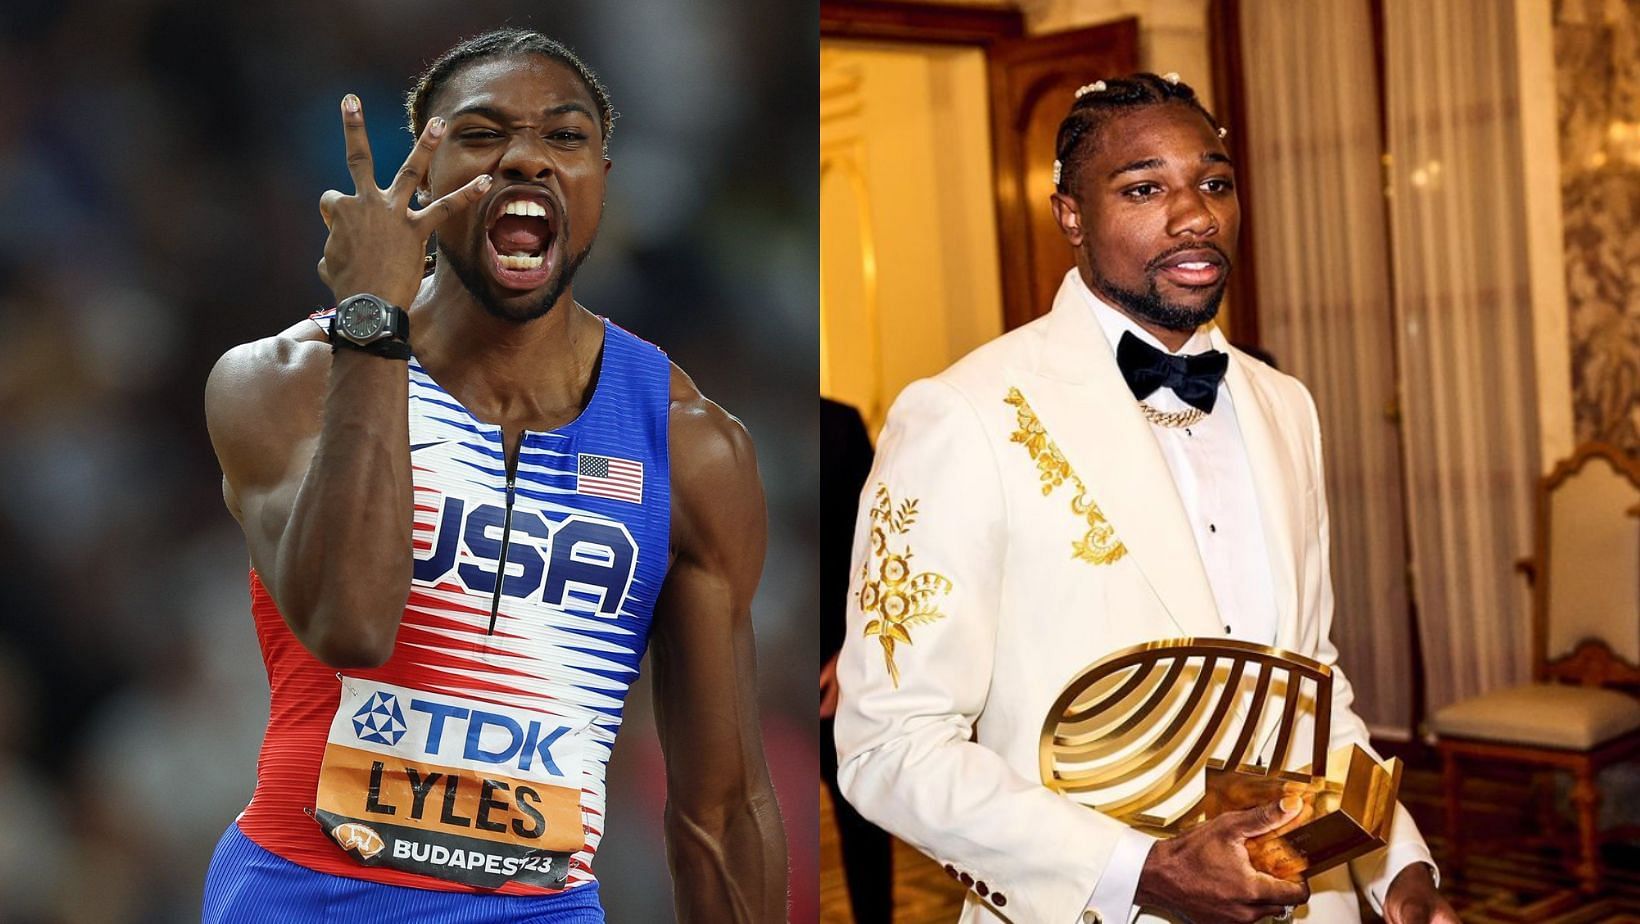 Noah Lyles wins the World Athlete of the Year 2023